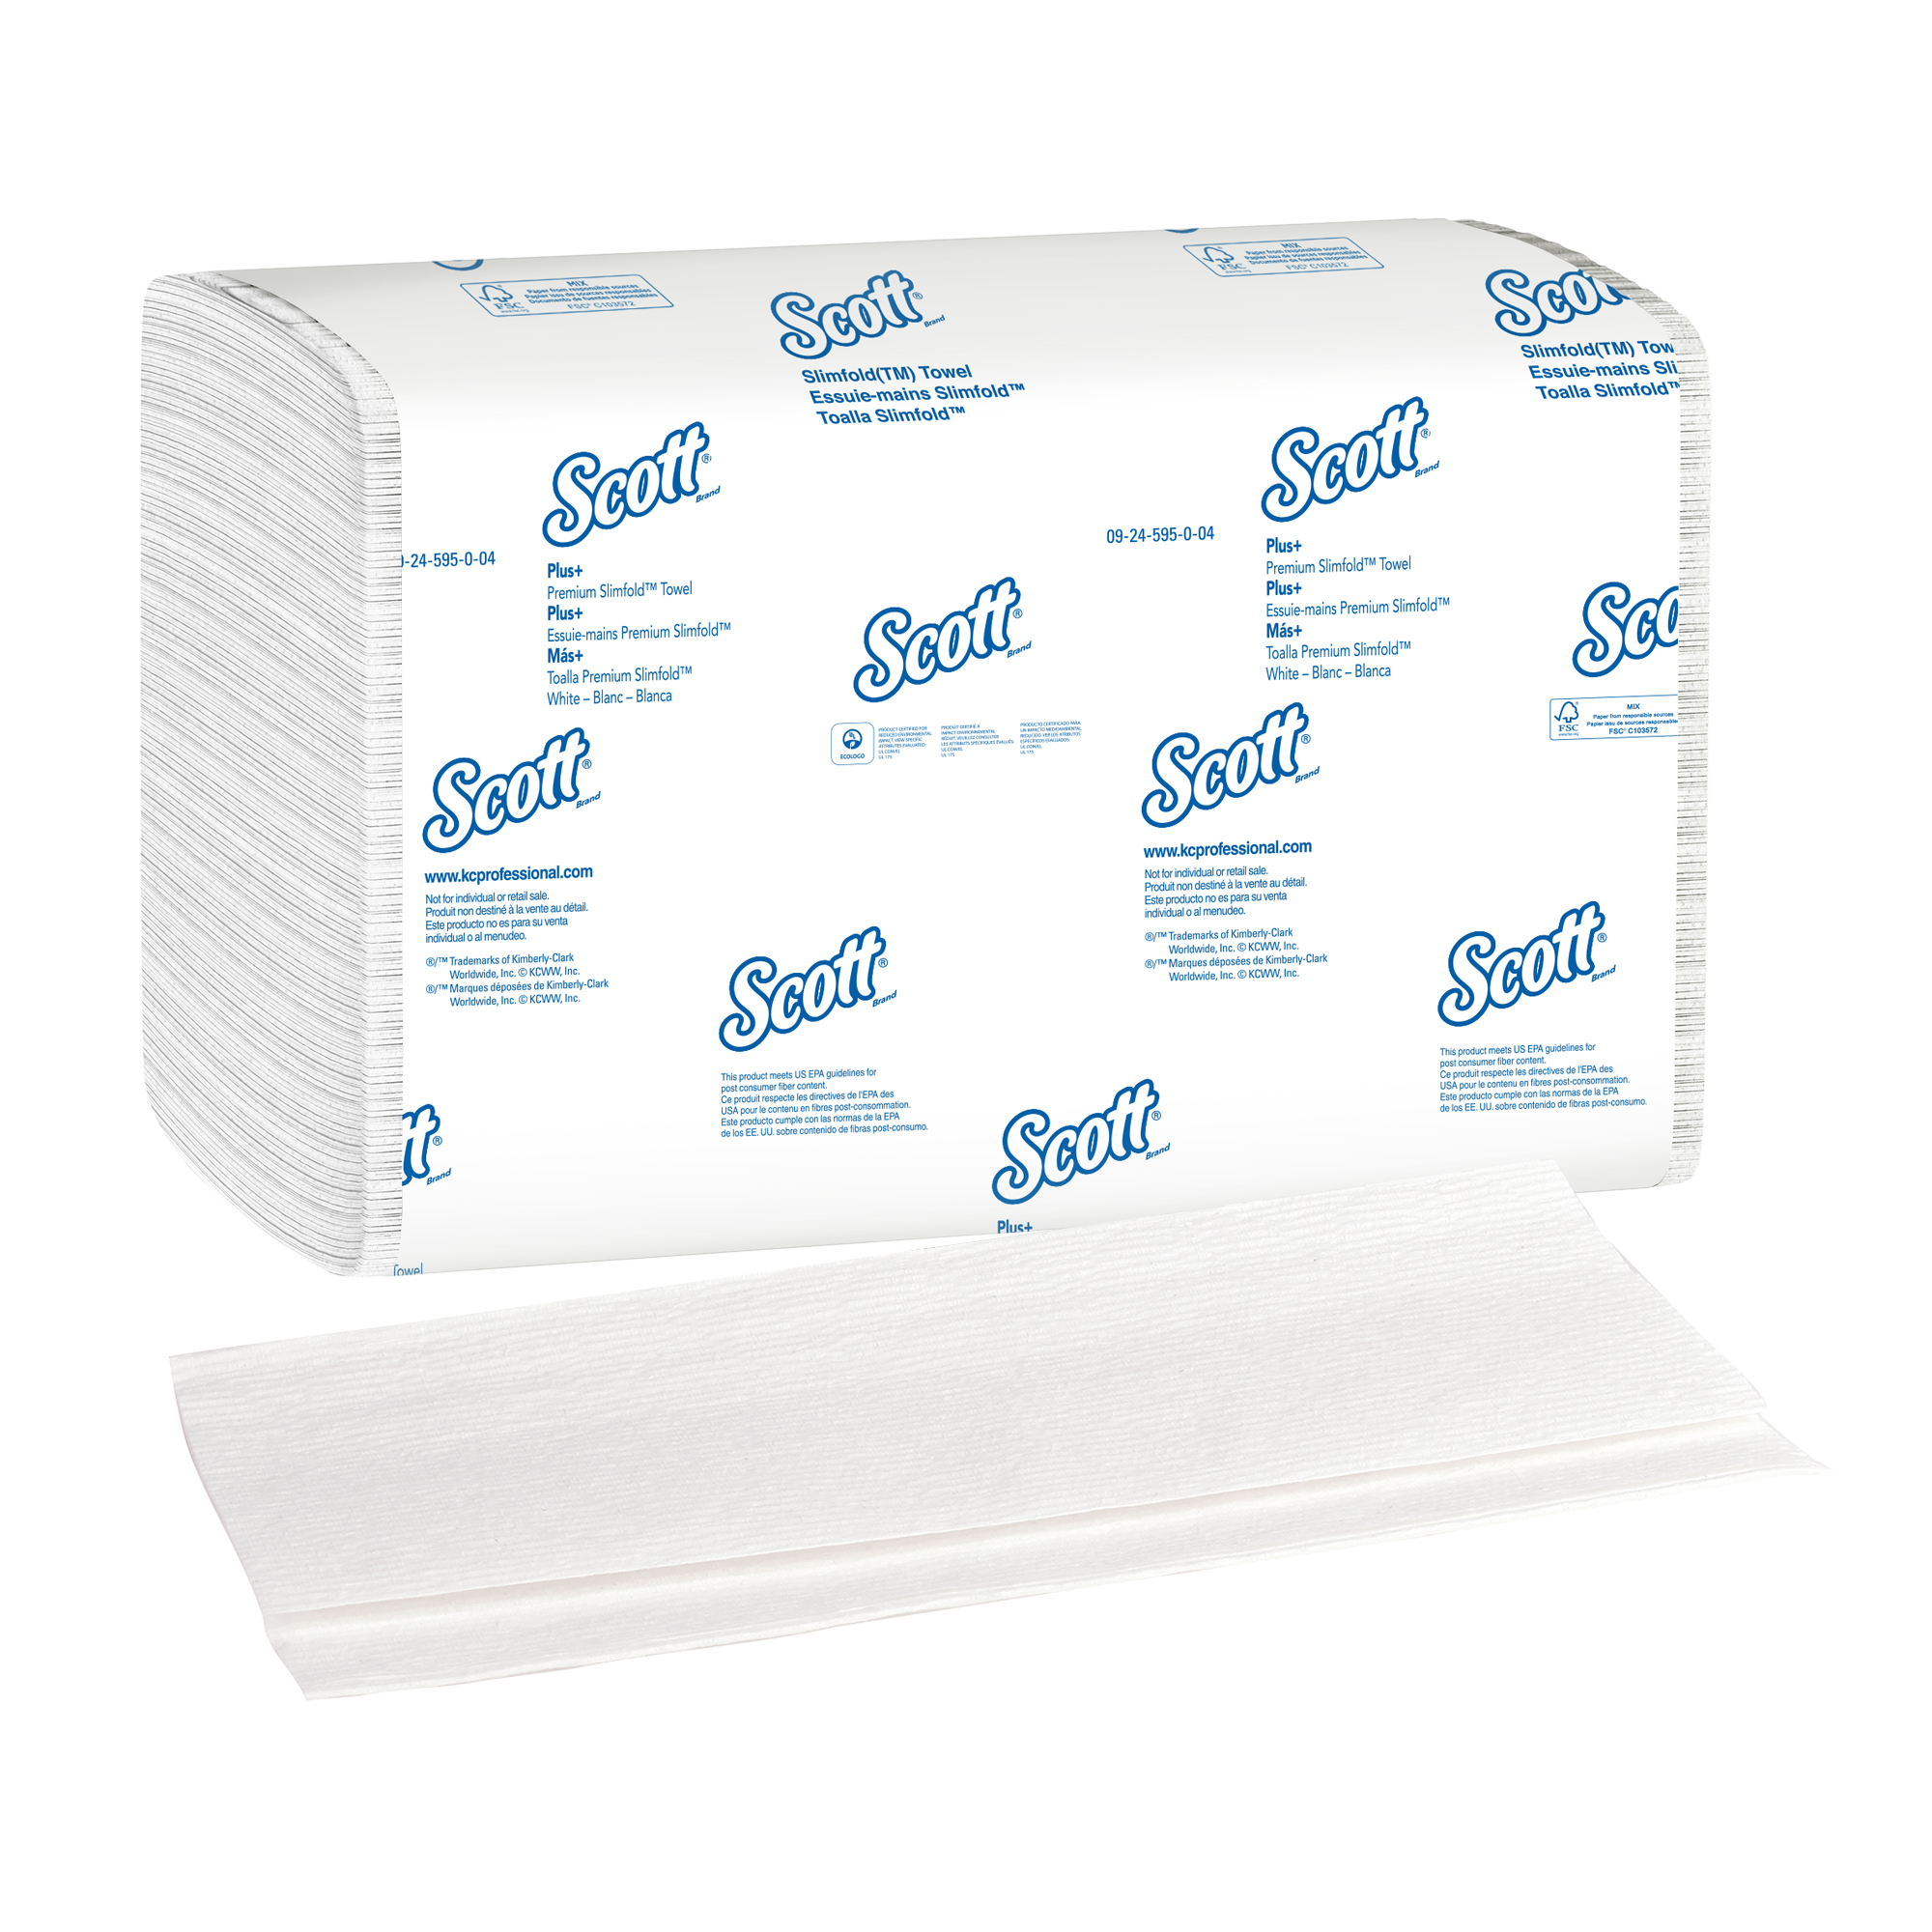 Picture of Slimfold Paper Towels, 7 1/2 x 11 3/5, White, 90/Pack, 24 Packs/Carton